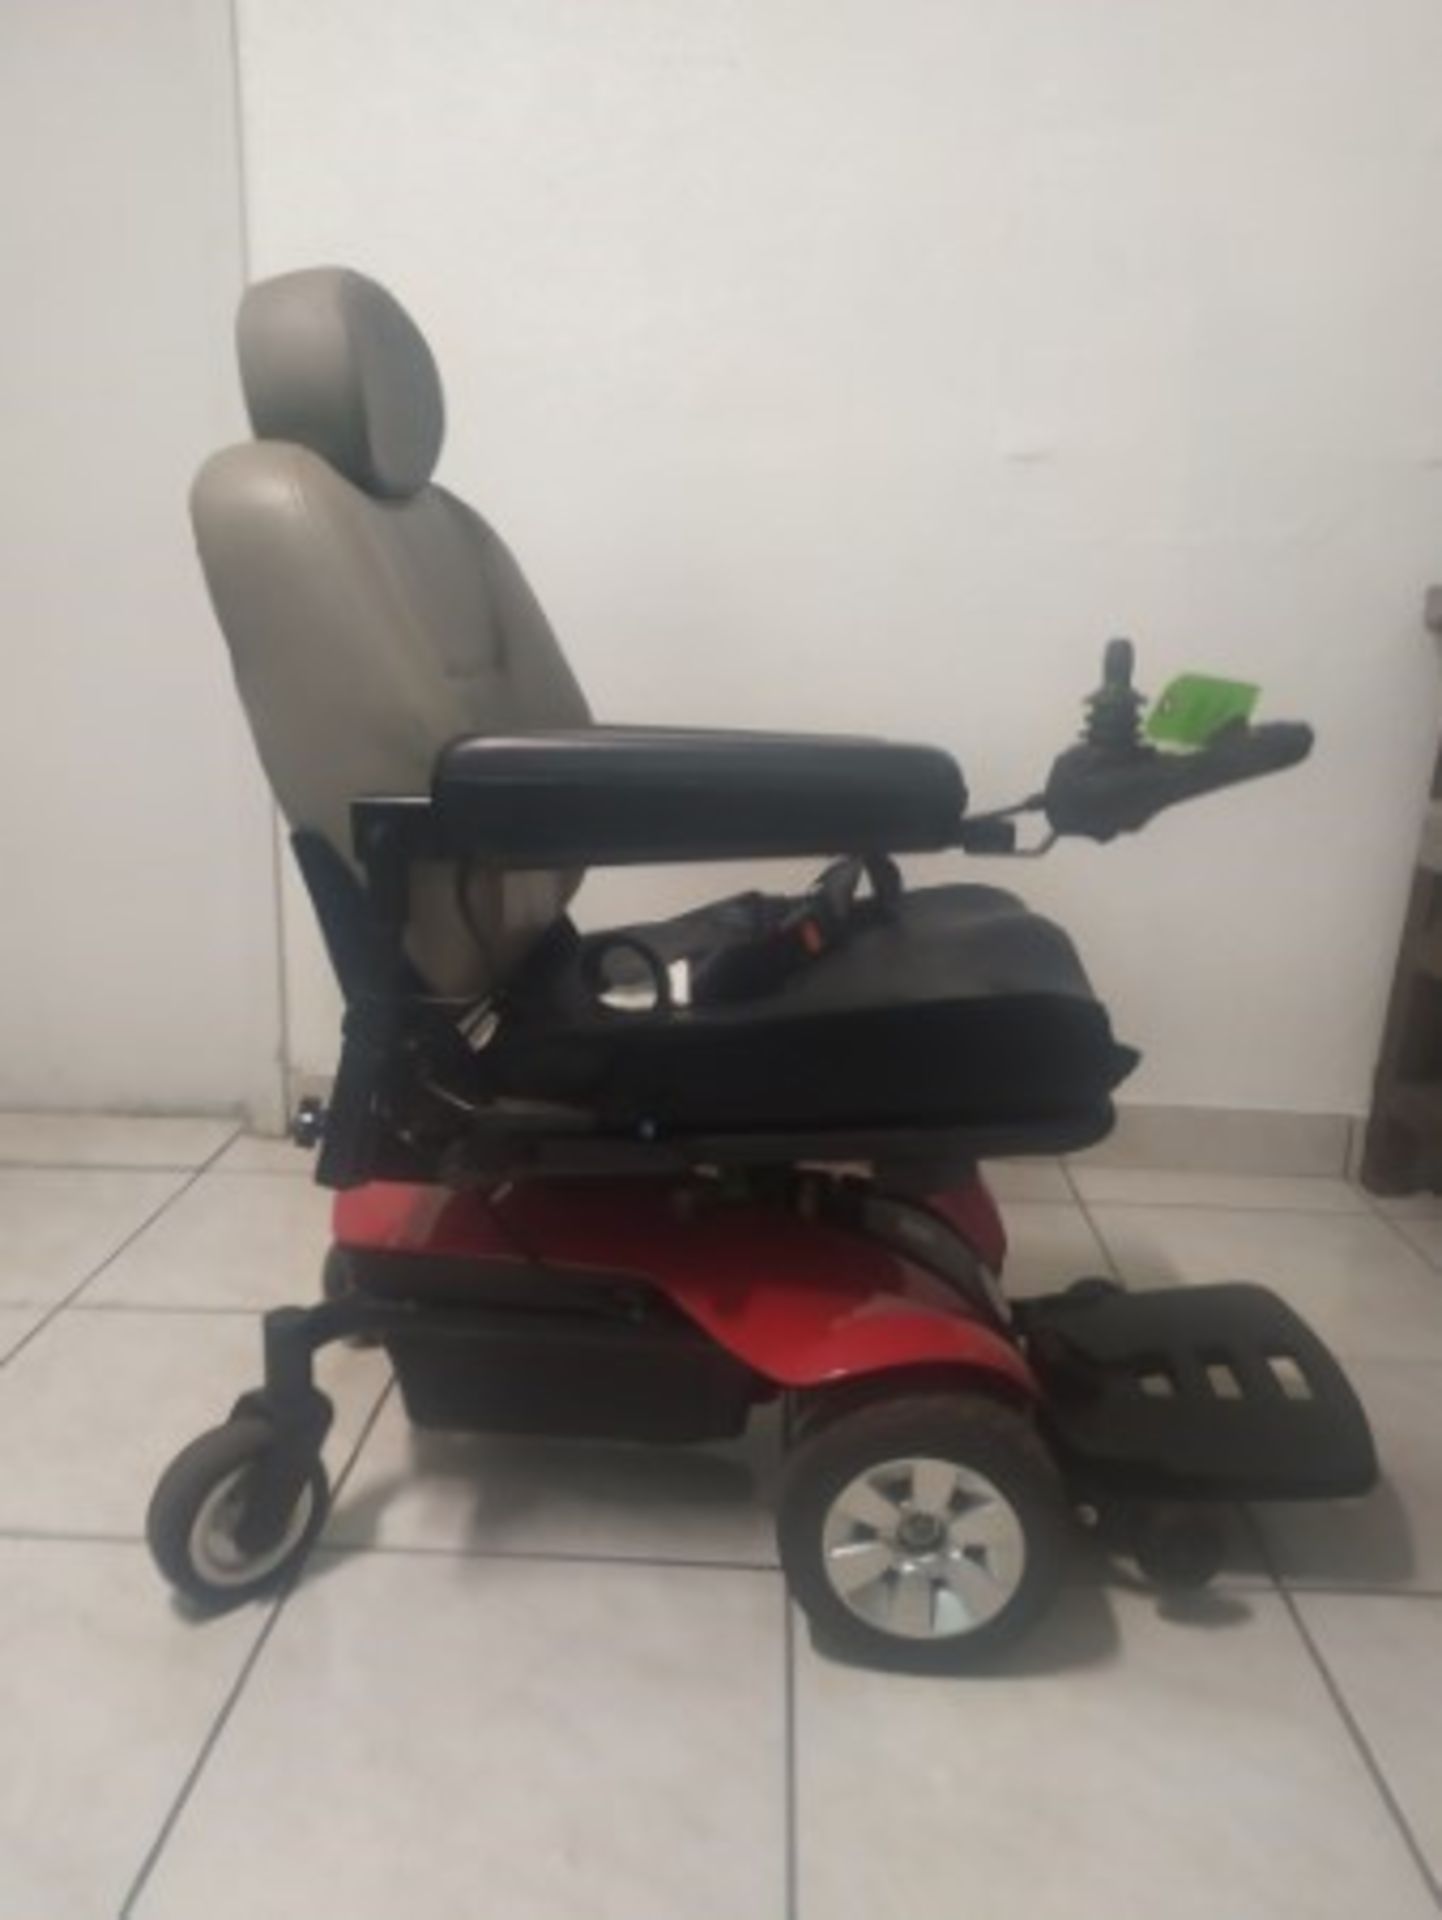 2015 PRIDE TSS300 6-WHEEL POWER CHAIR WITH JOYSTICK CONTROL - RED - 300LB CAPACITY - SERIAL No. JB10 - Image 3 of 4